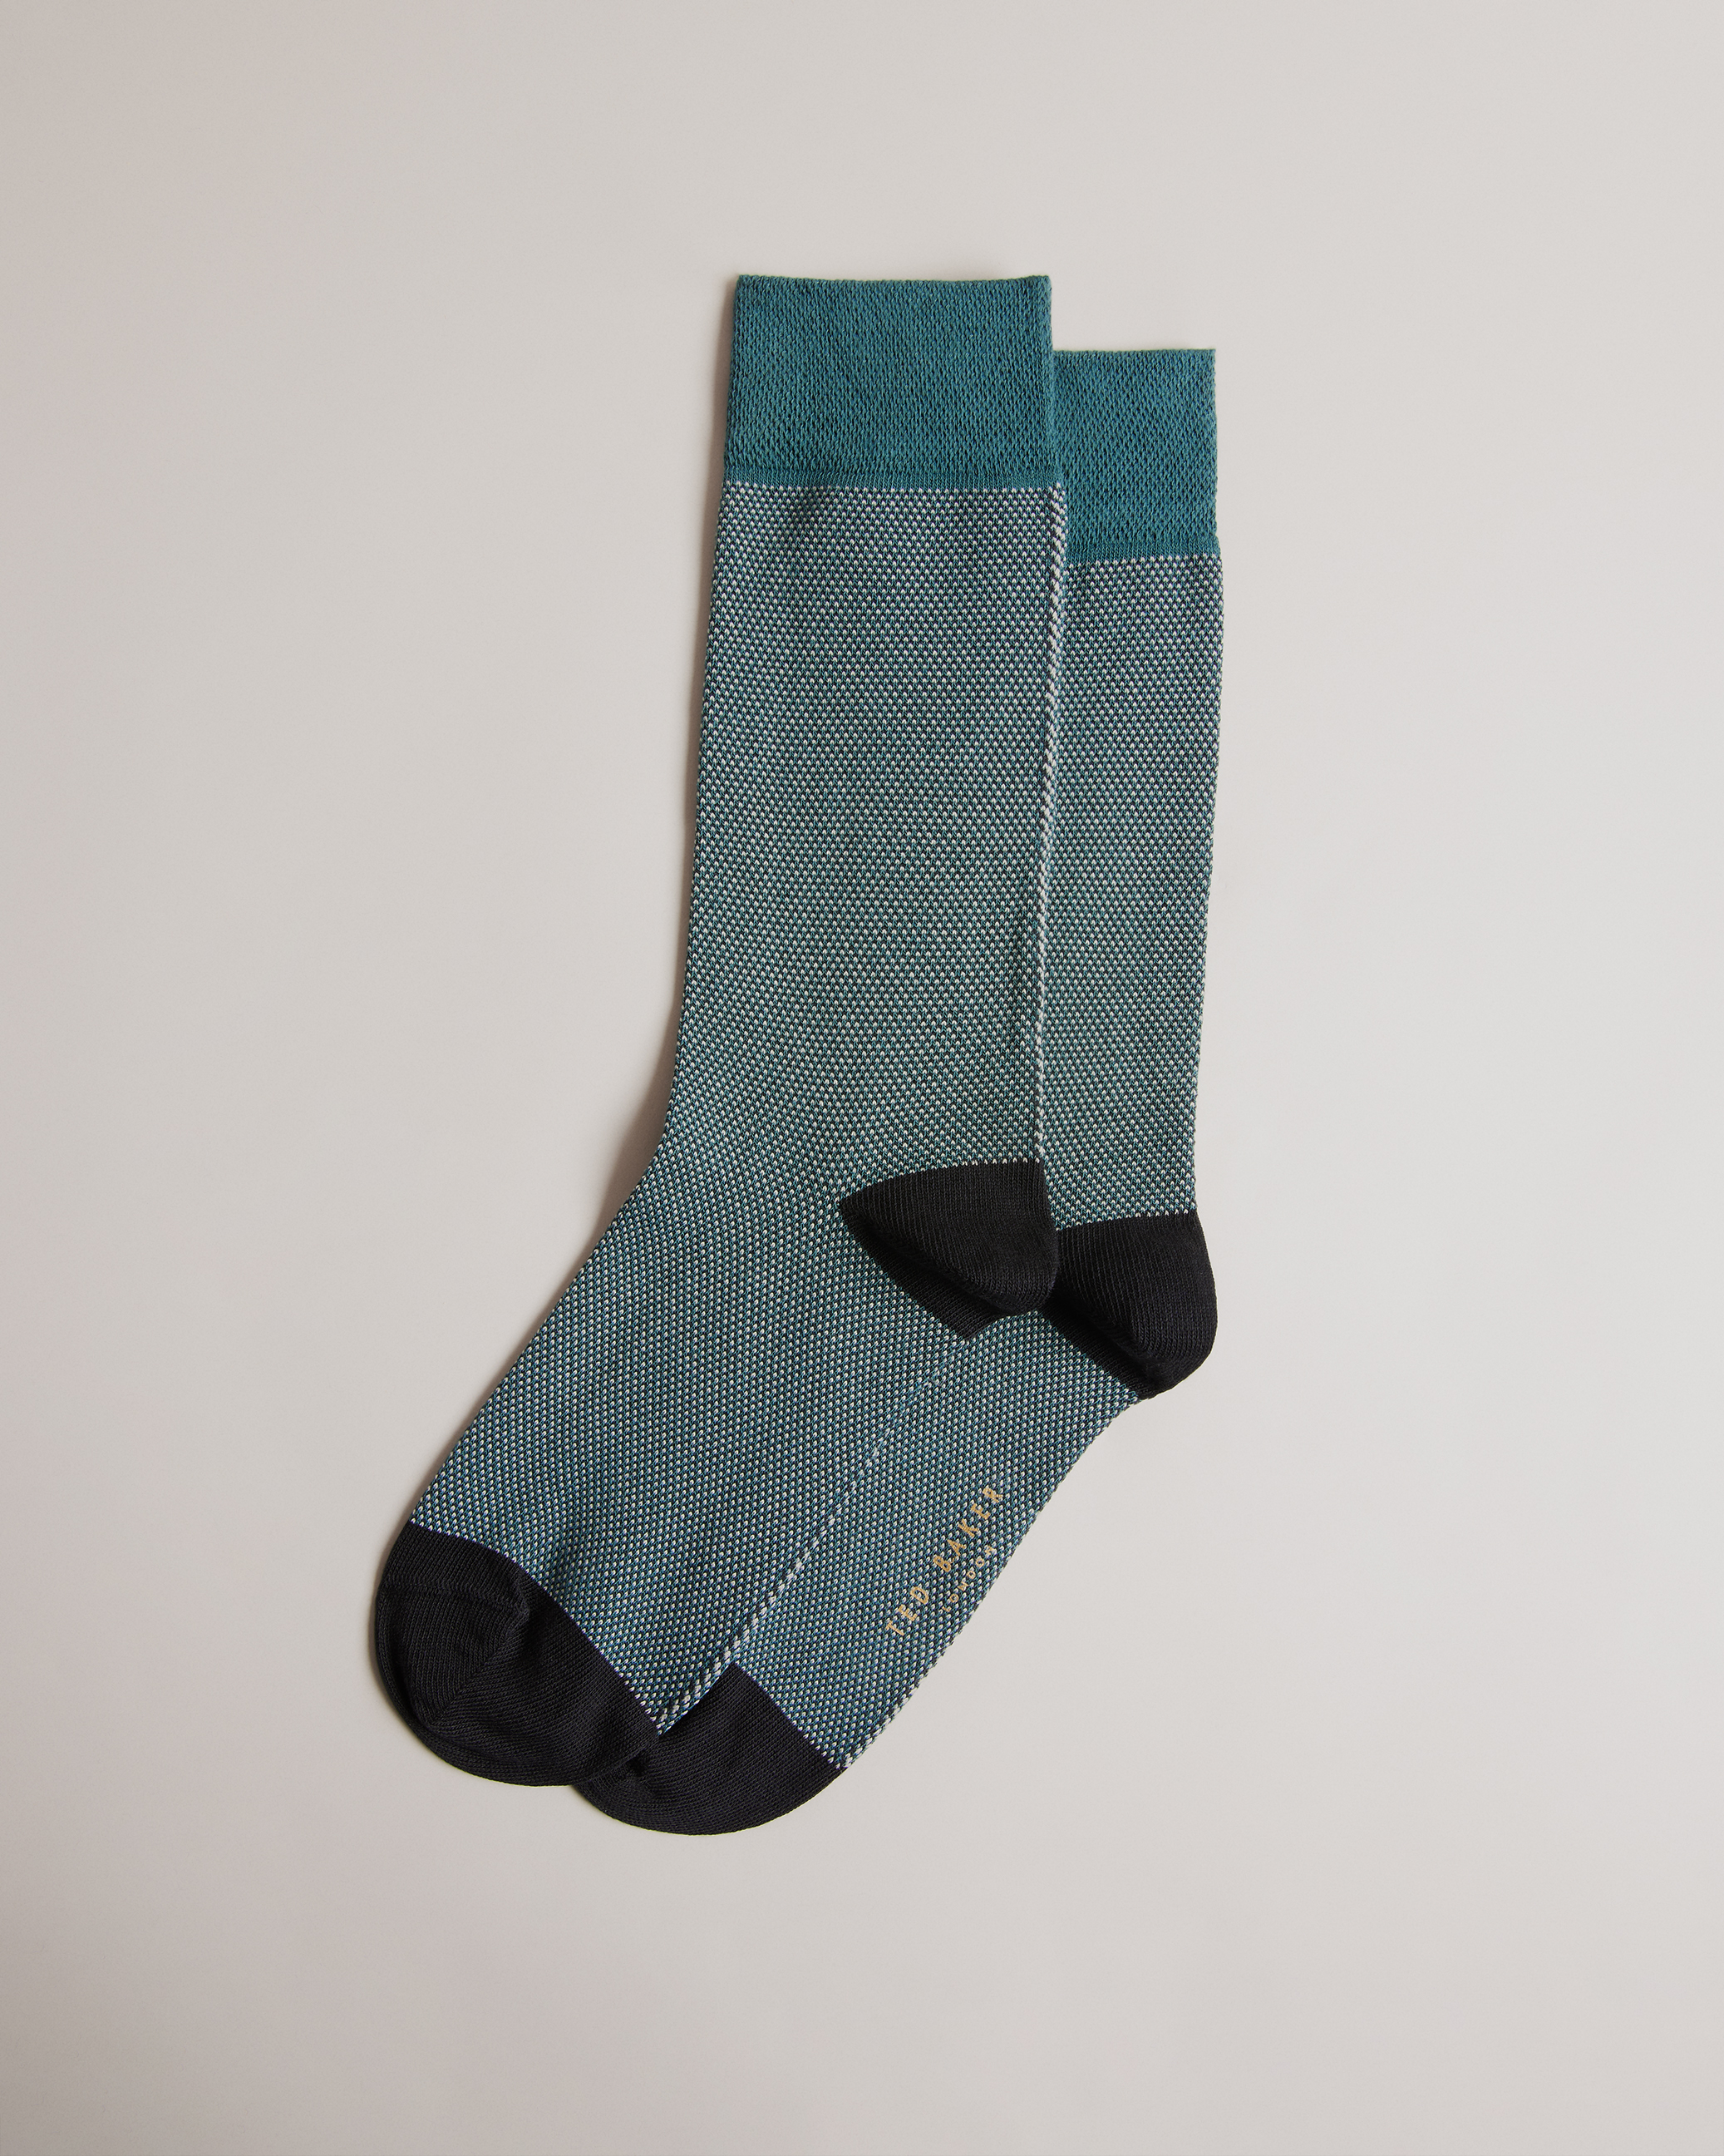 TED BAKER Three Pack Of Socks in AShort Sleeveorted